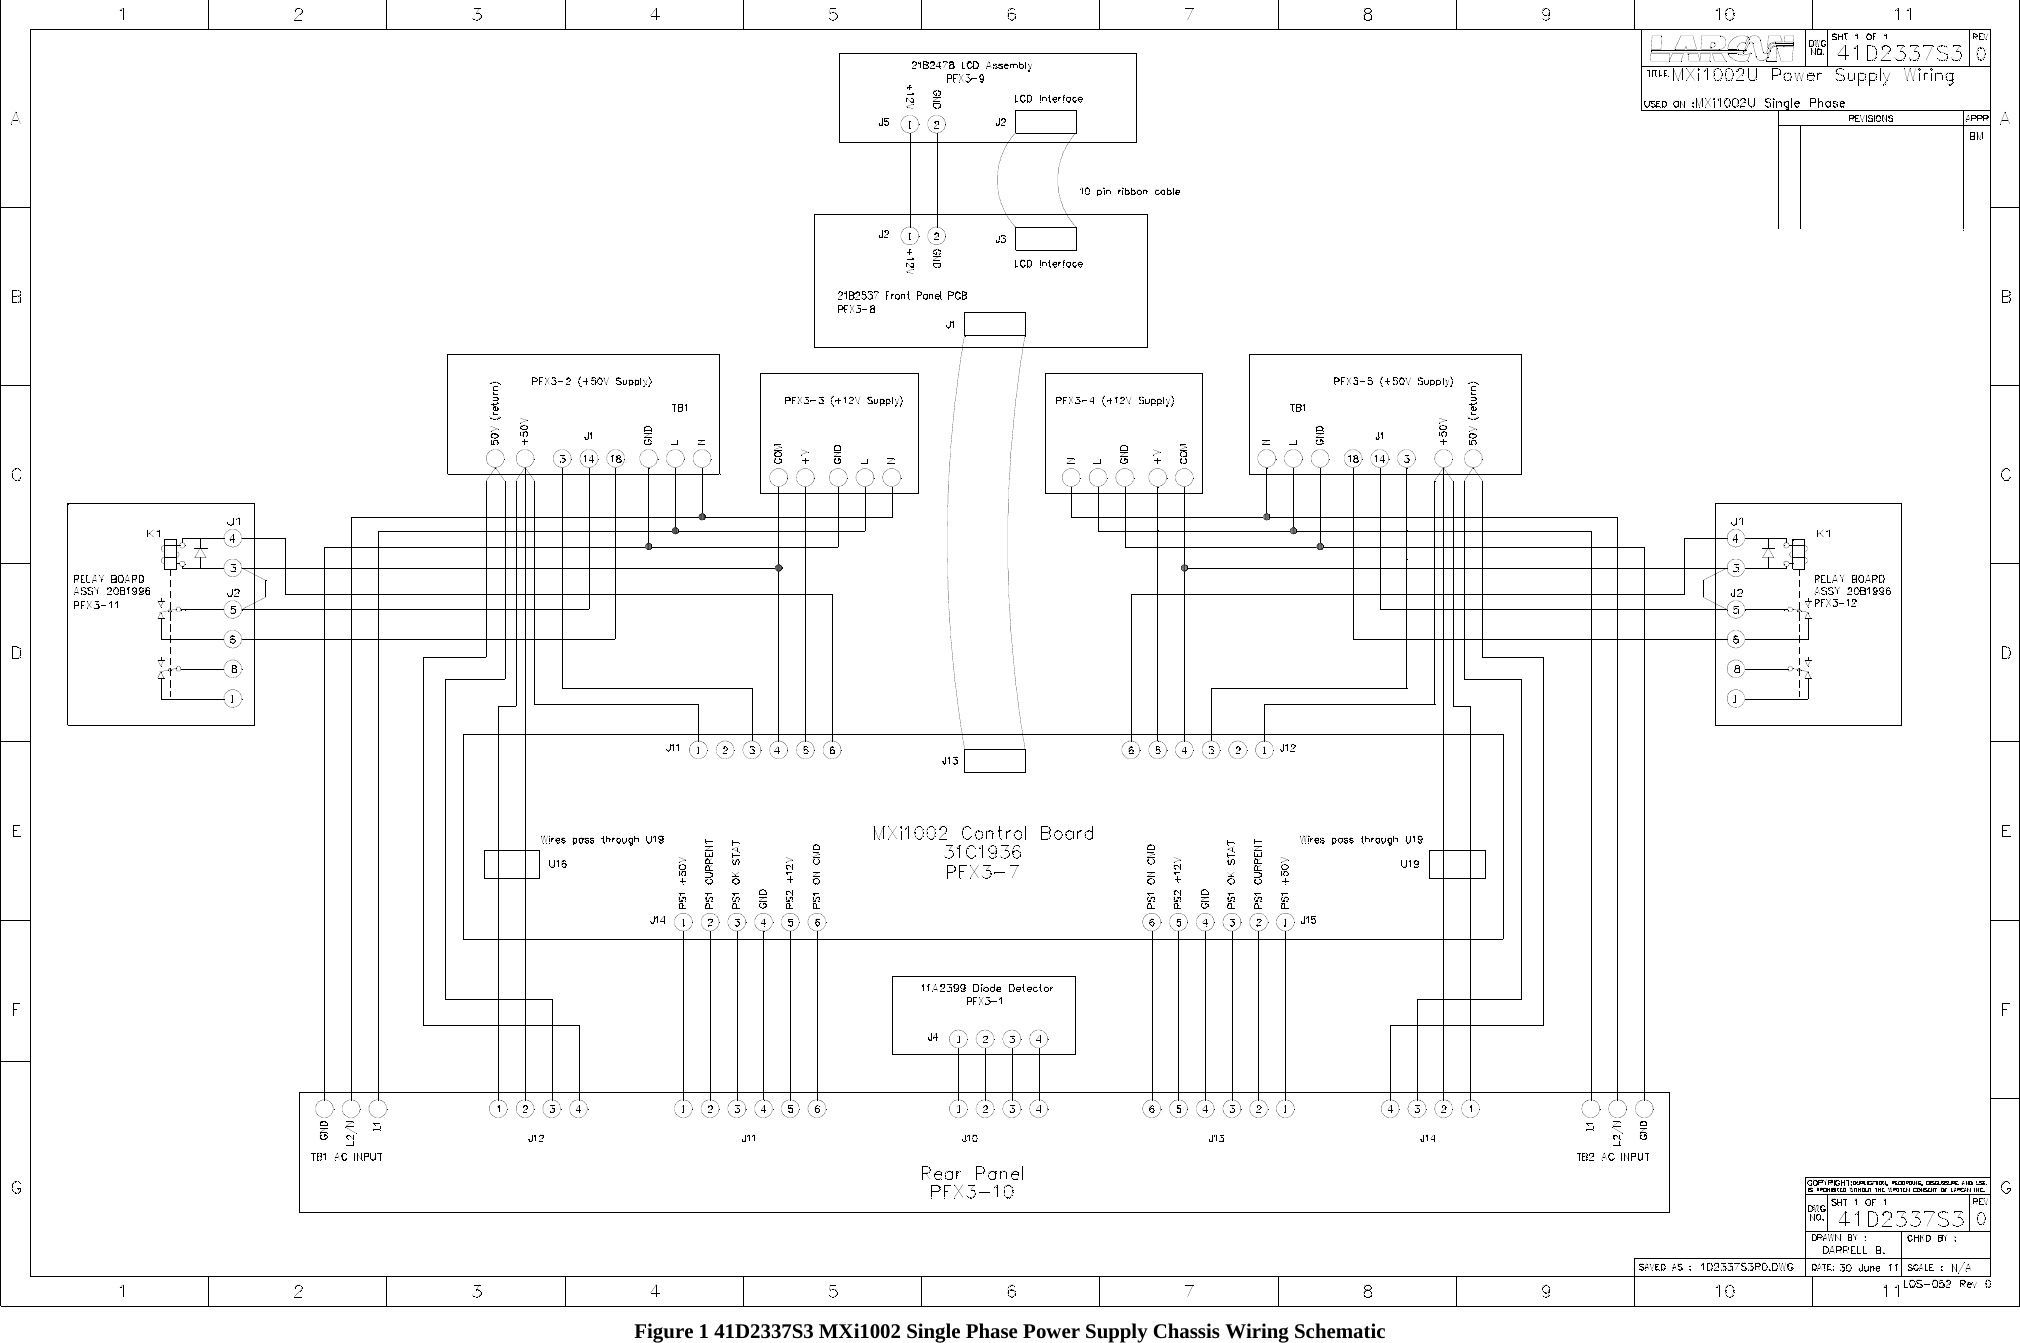   Figure 1 41D2337S3 MXi1002 Single Phase Power Supply Chassis Wiring Schematic   